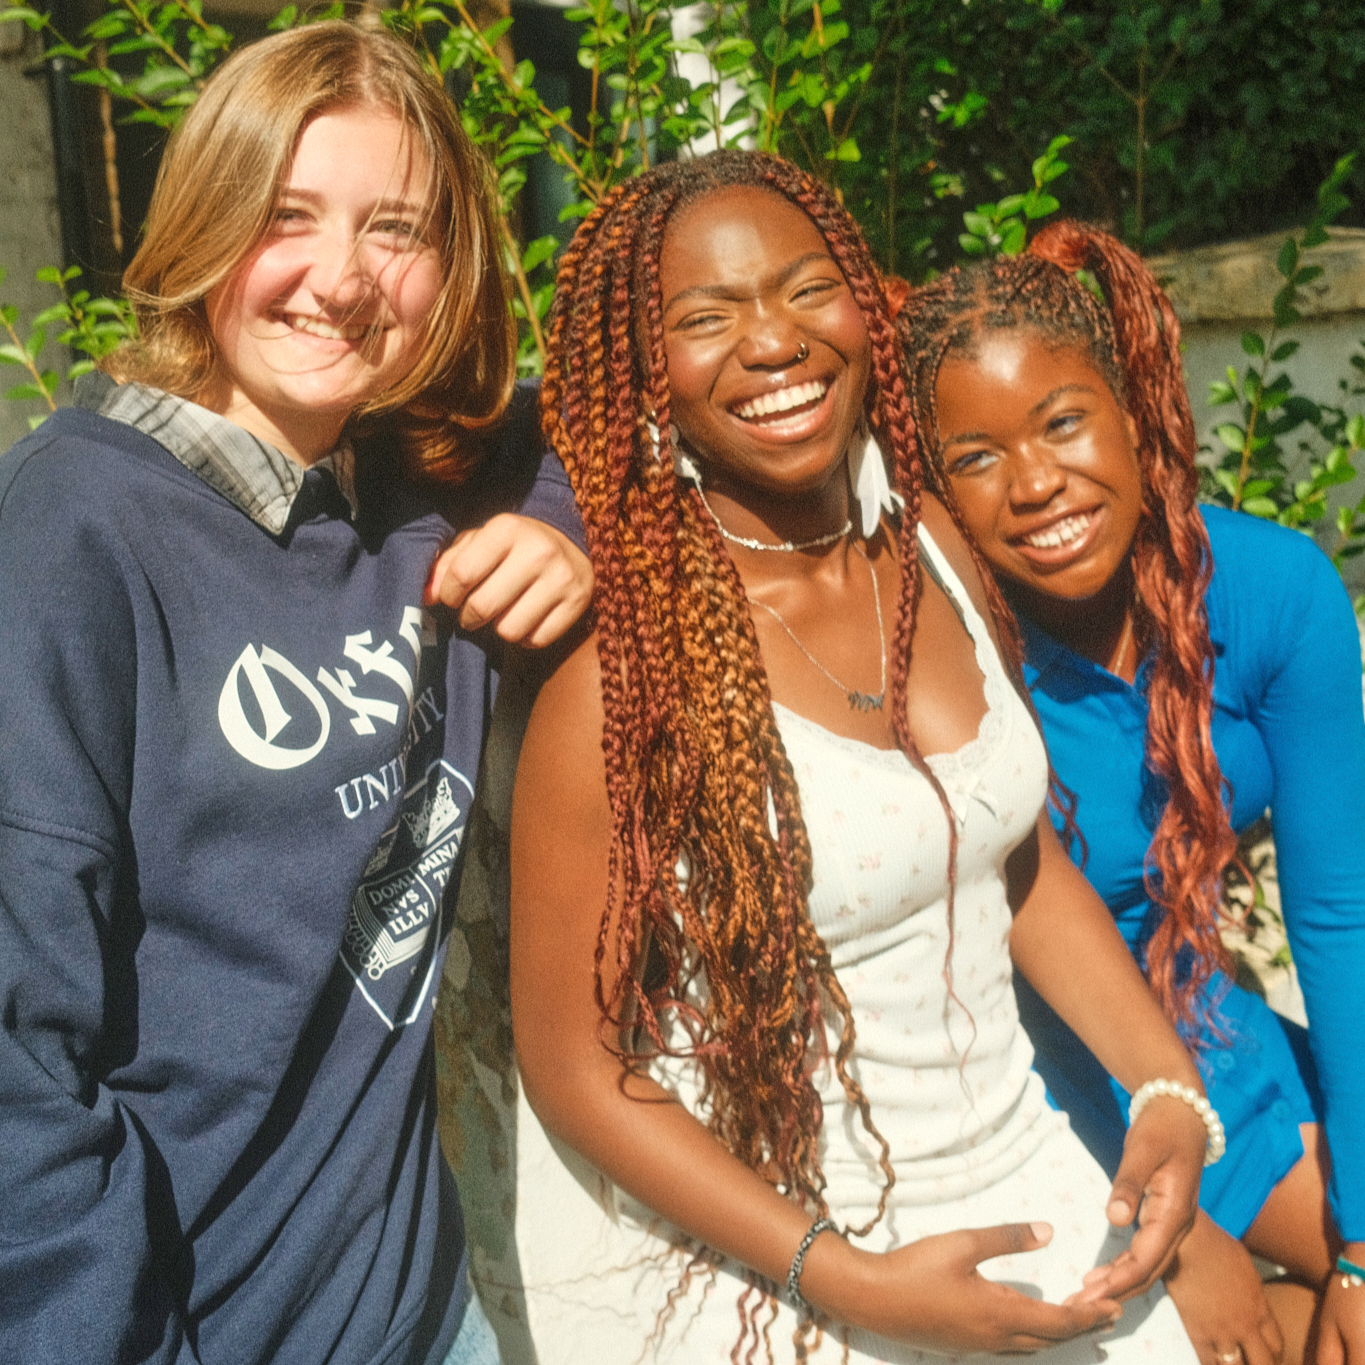 group of 3 teen girls smiling at a camera on a summer's day